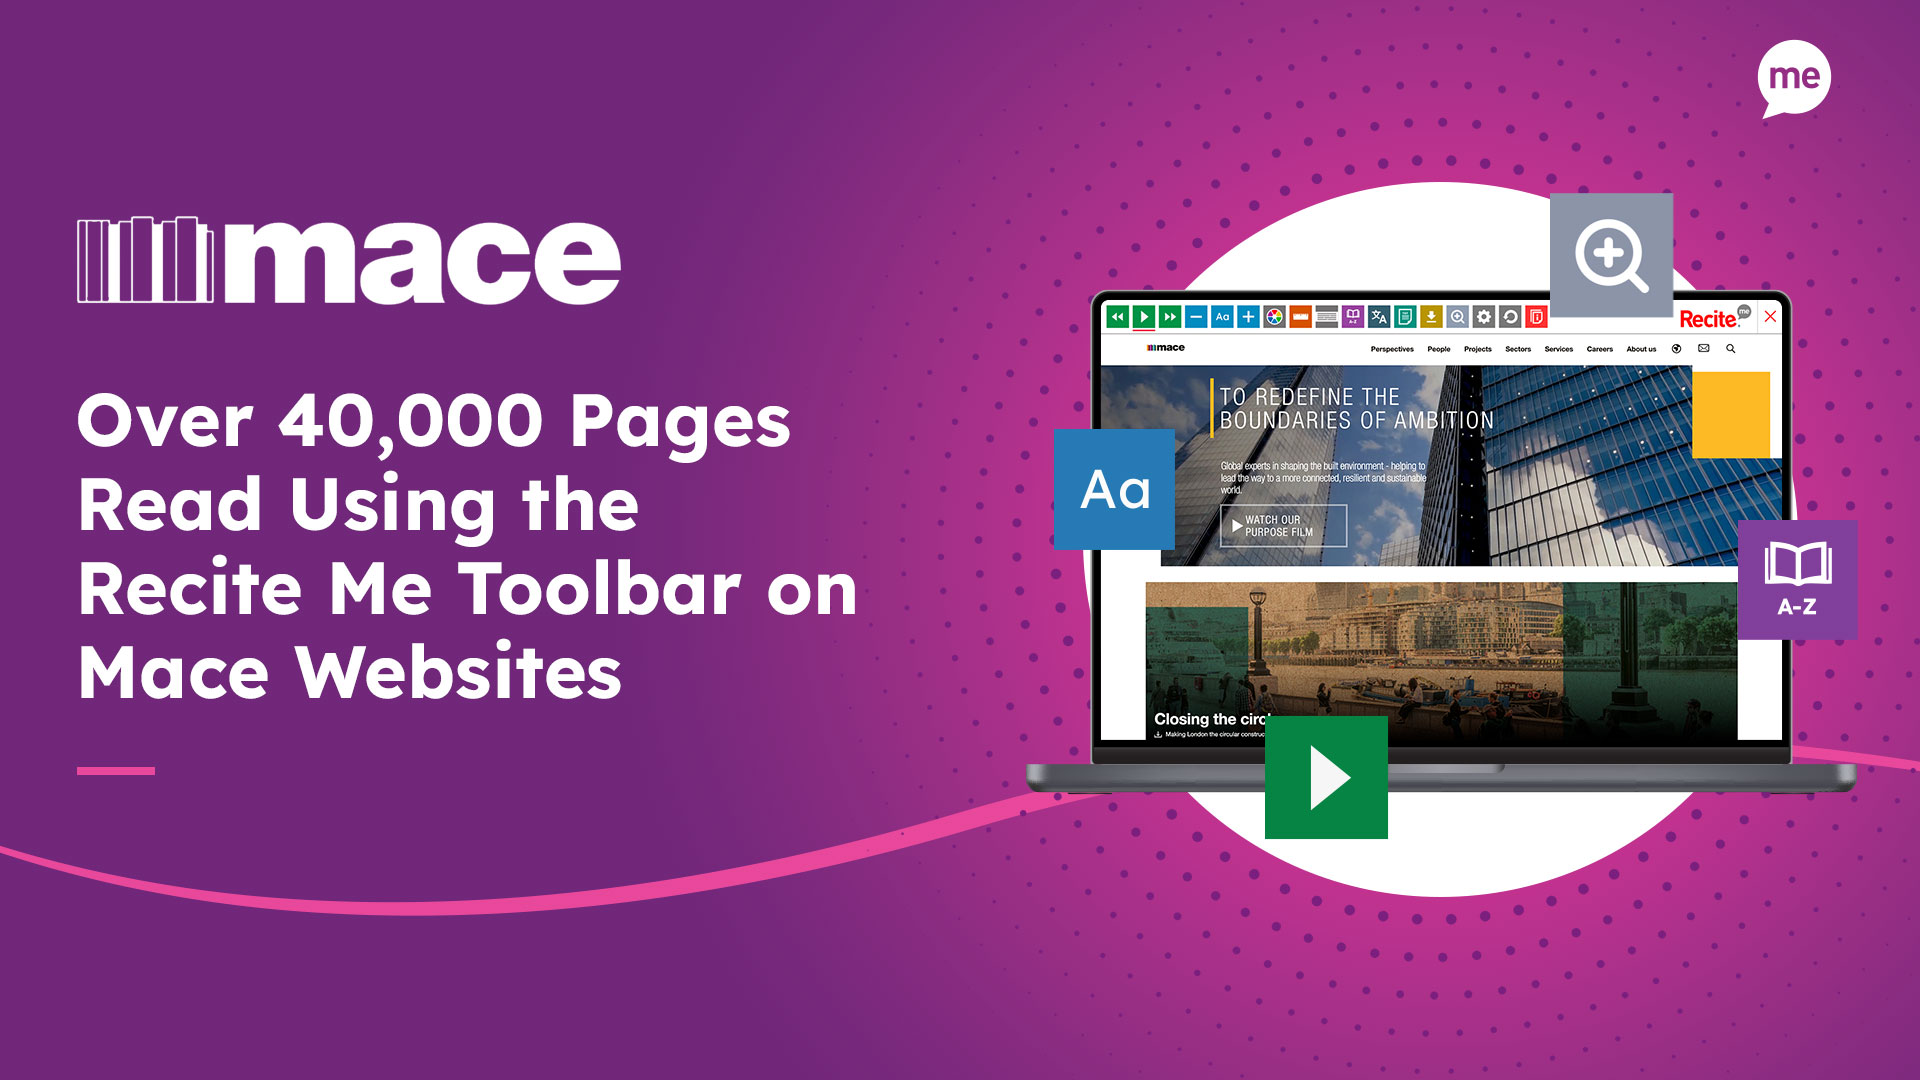 Over 40,000 Pages Read Using the Recite Me Toolbar on Mace Websites.